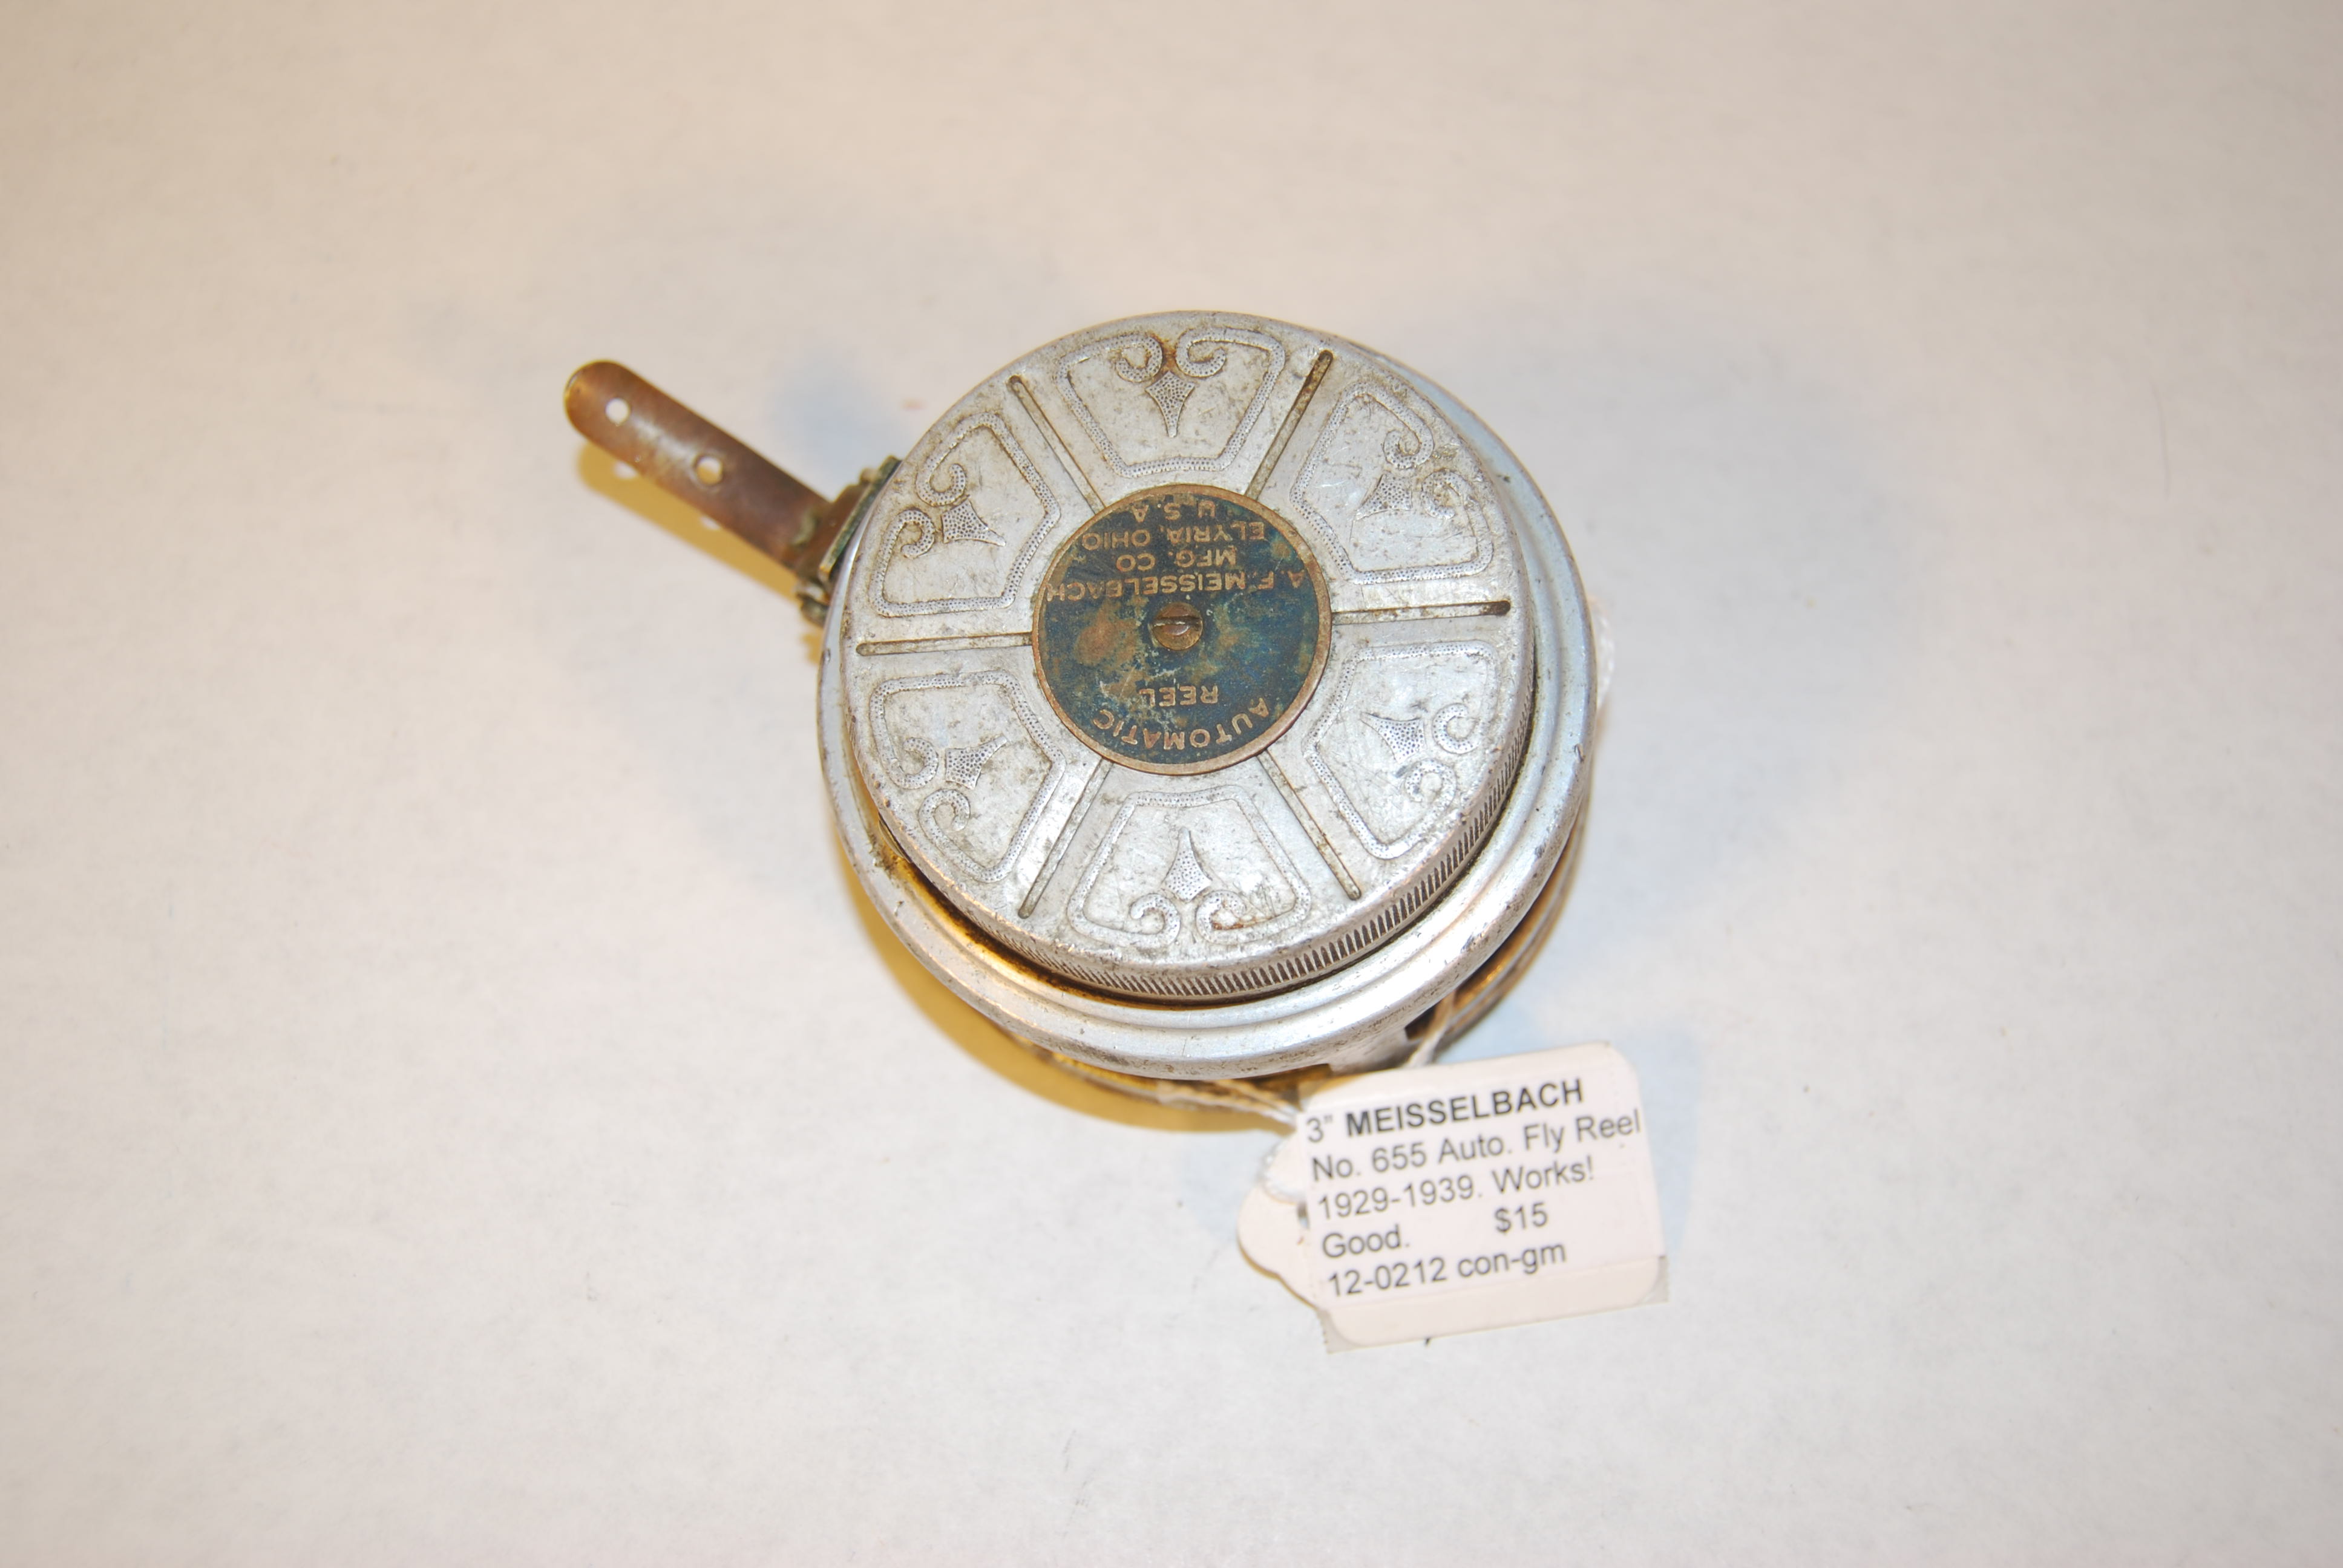 3” MEISSELBACH No. 655 Automatic Fly Reel. 1929-1939.